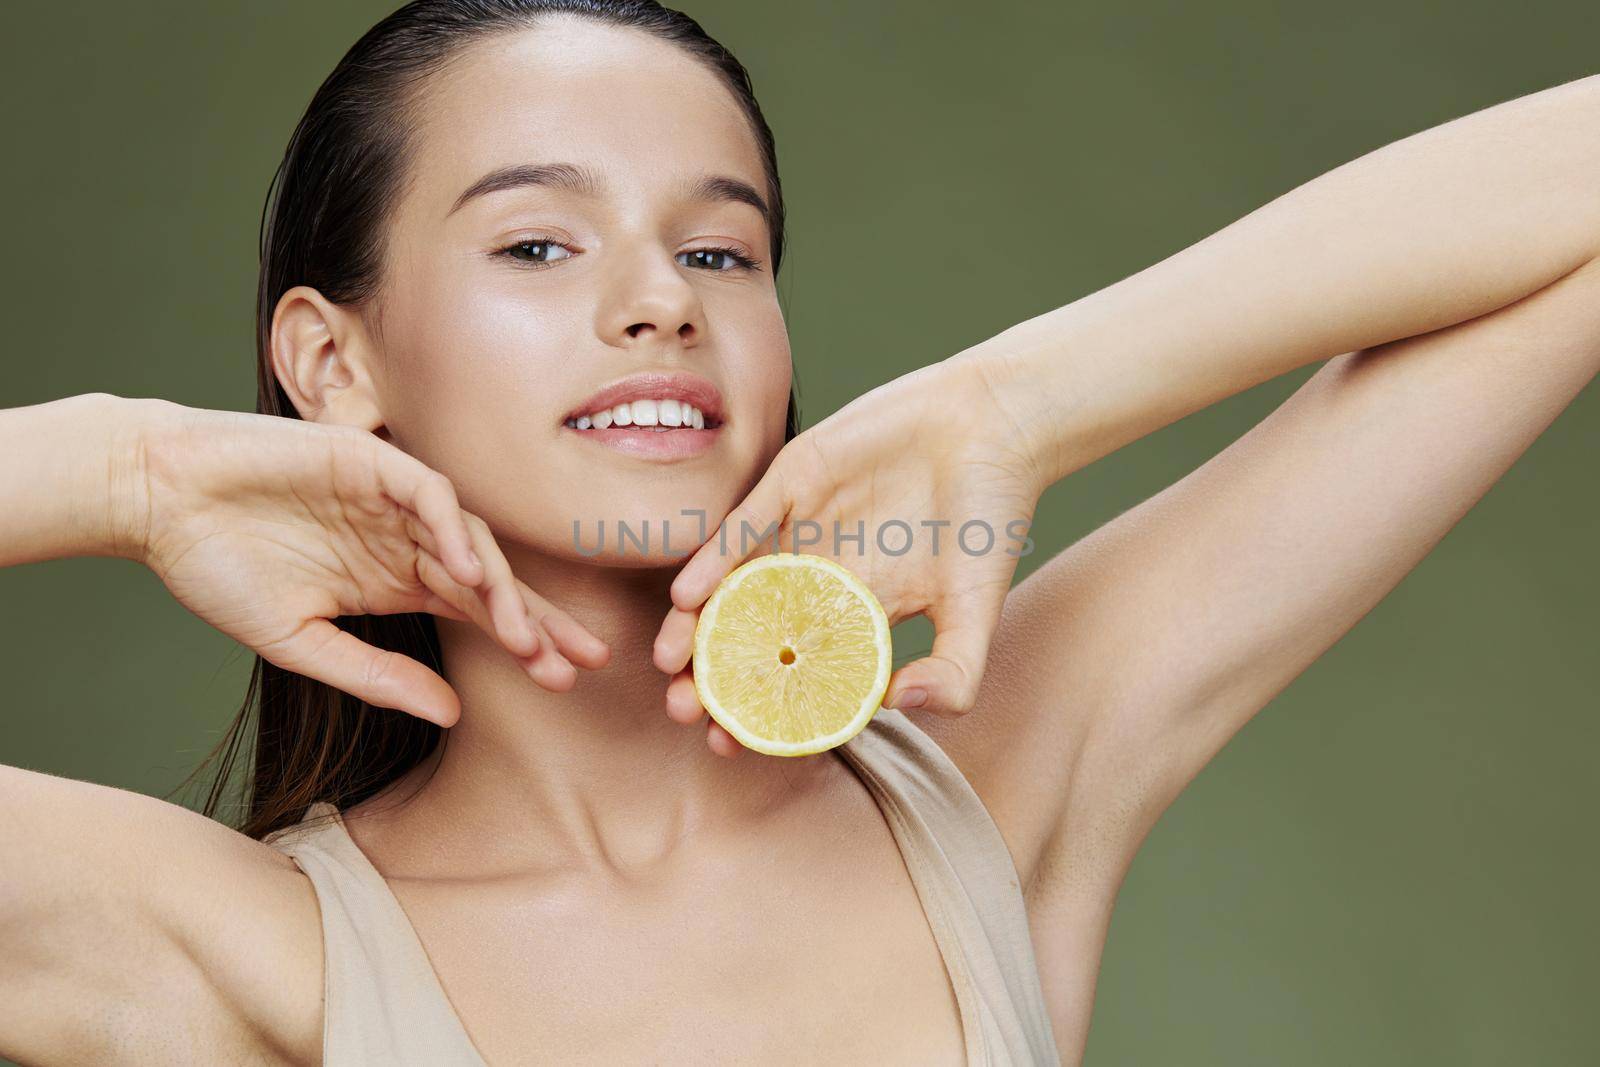 beautiful woman eating lemon in hands smile vitamins diet green background. High quality photo